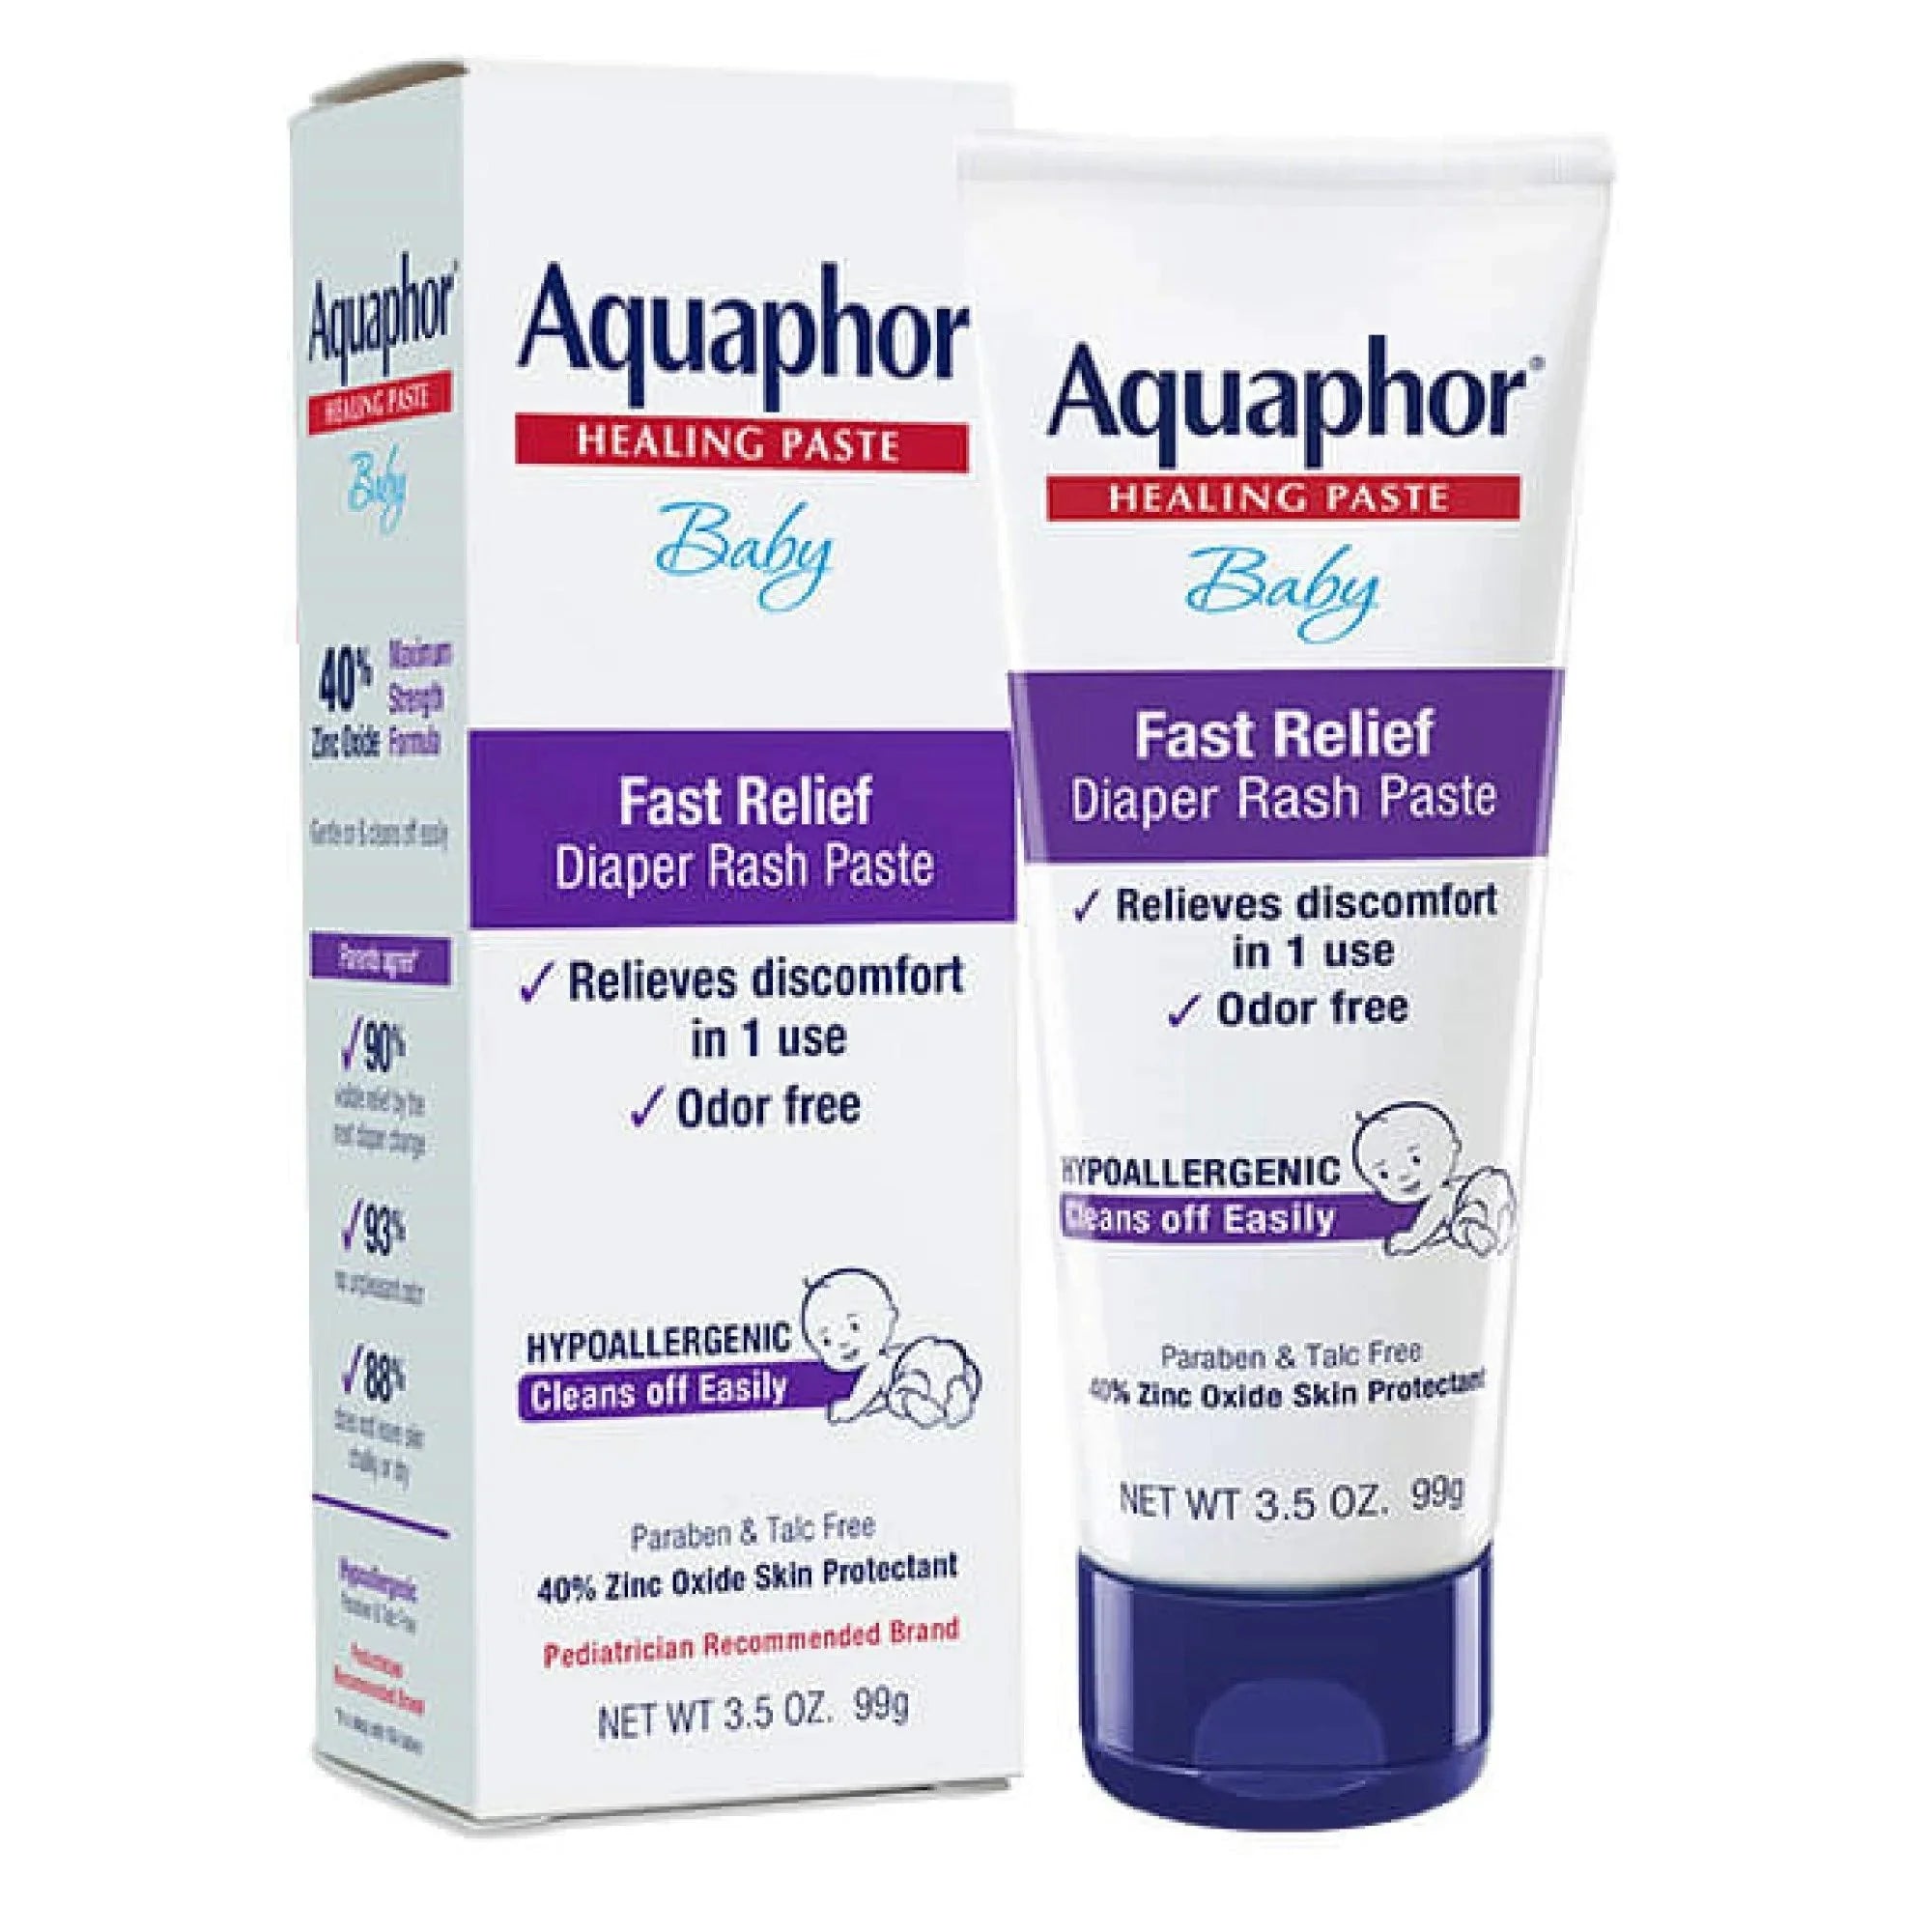 Wholesale prices with free shipping all over United States Aquaphor Baby Diaper Rash Paste - For Serious Diaper Rash and Flare-ups - 3.5 Oz. Tube - Steven Deals